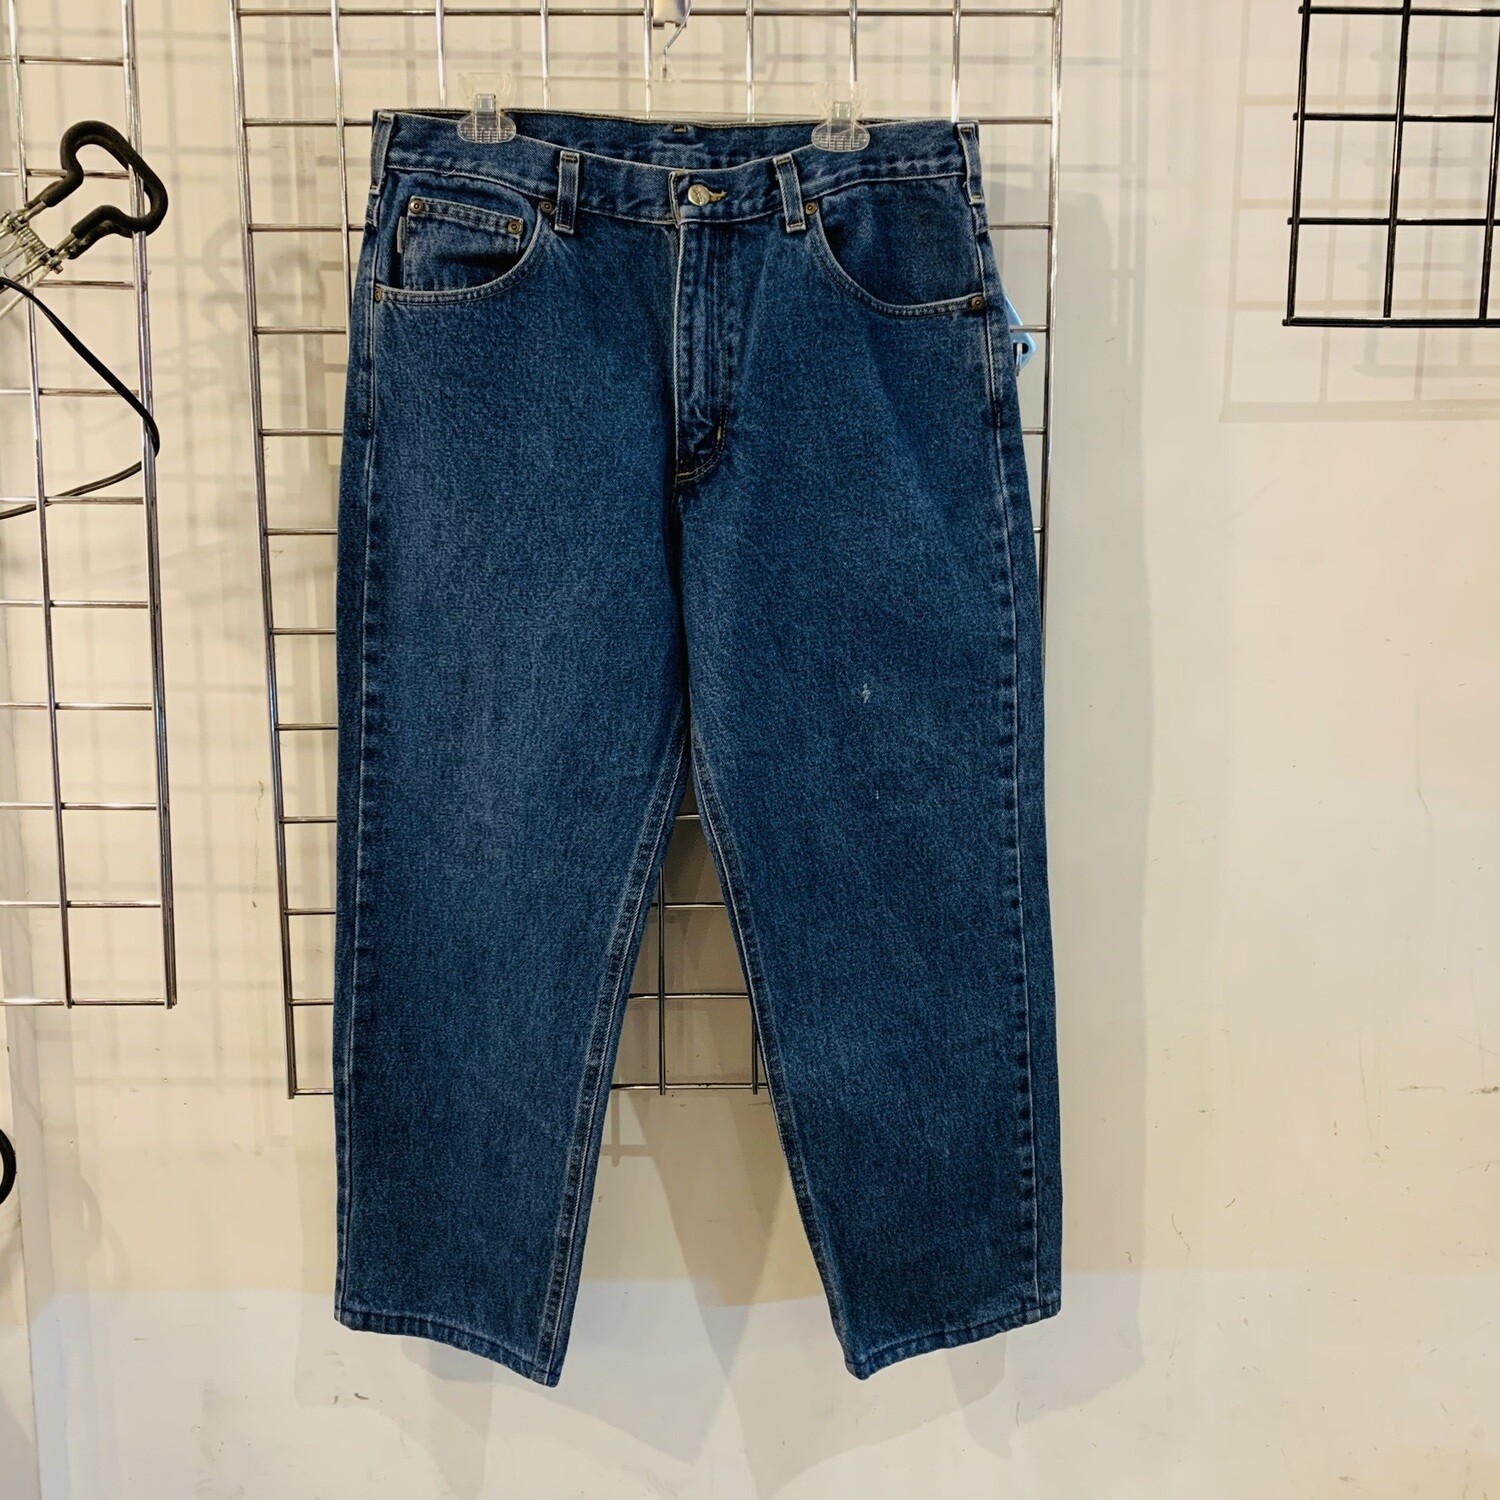 Size 36x30 Carhartt Relaxed Fit Jean